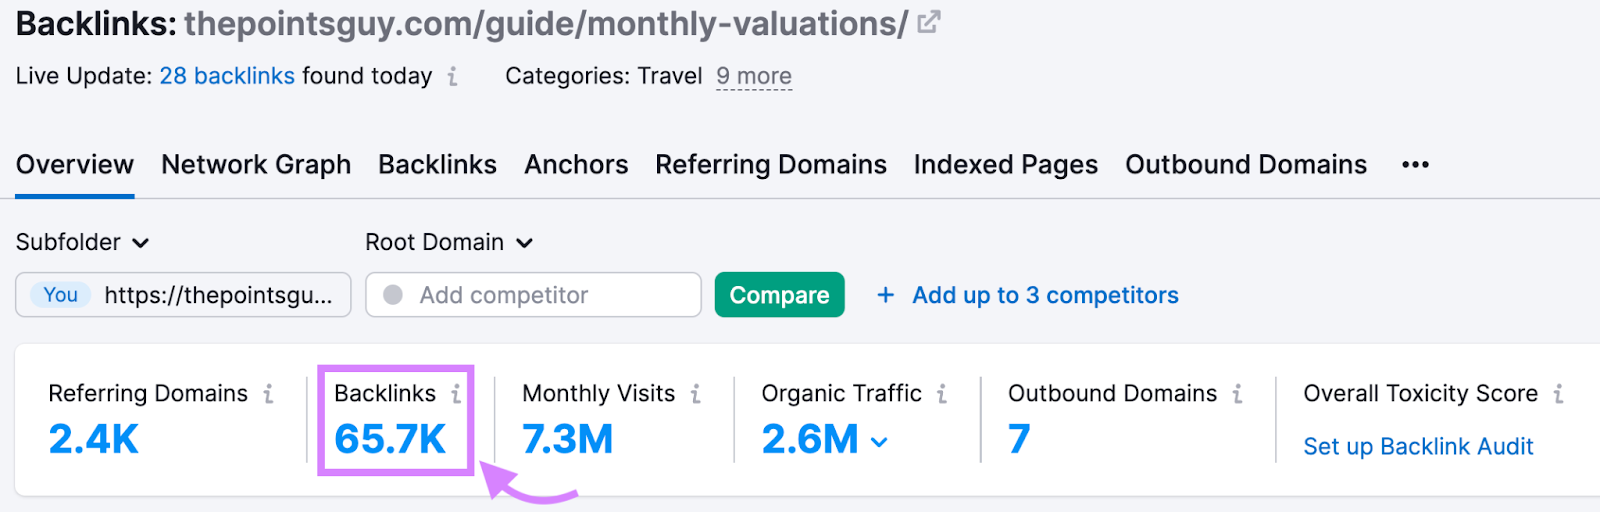 Backlink Analytics results for The Points Guy’s monthly valuations